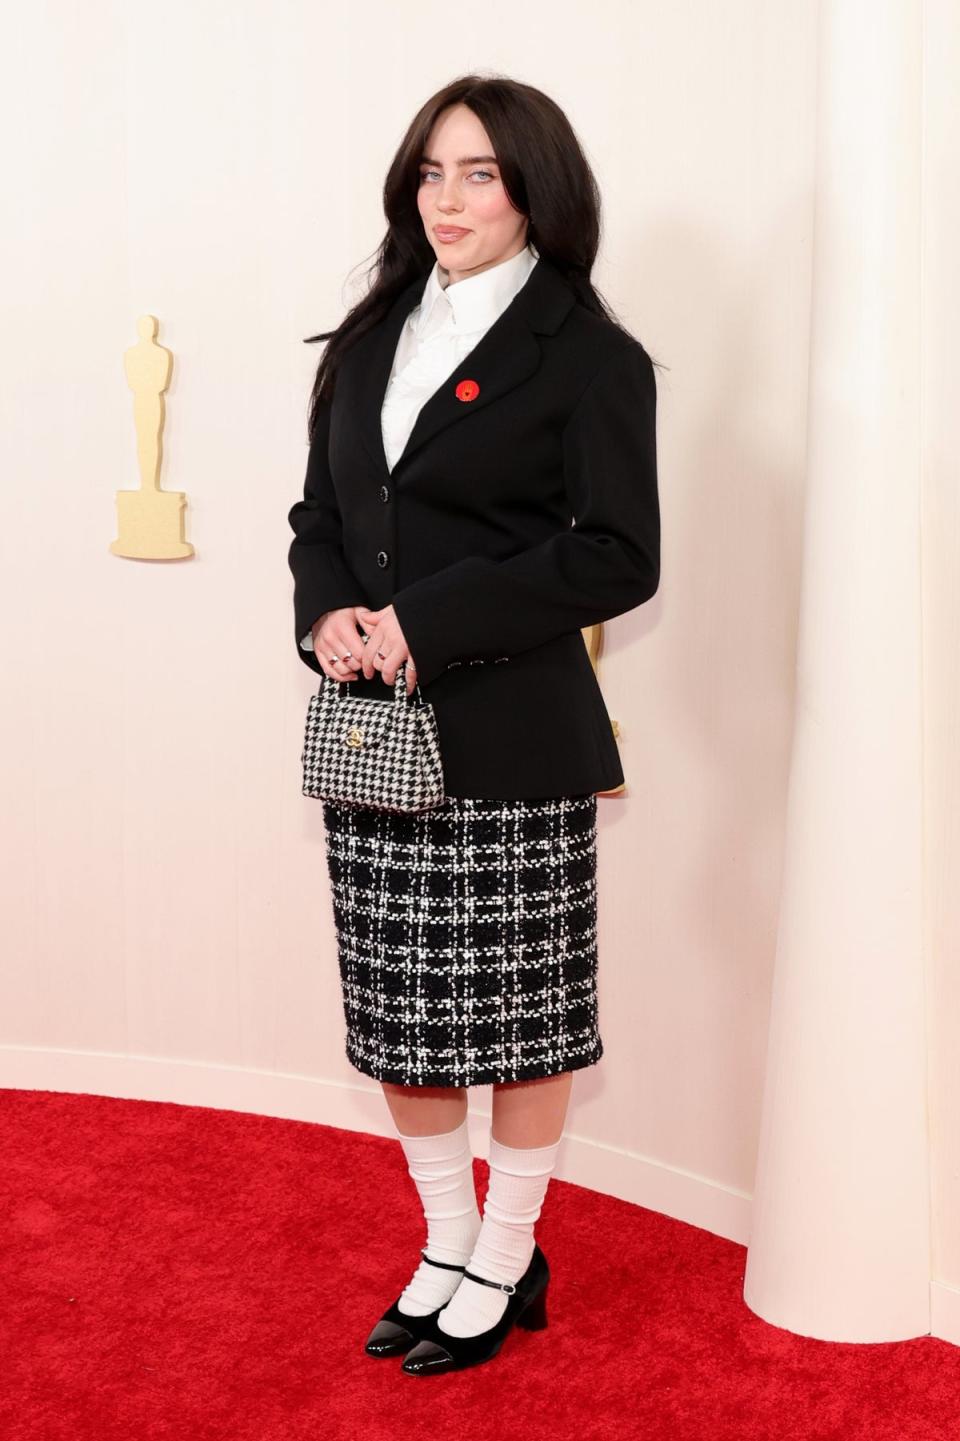 Billie Eilish in Chanel and anArtists4Ceasefire movement red pin (Getty Images)